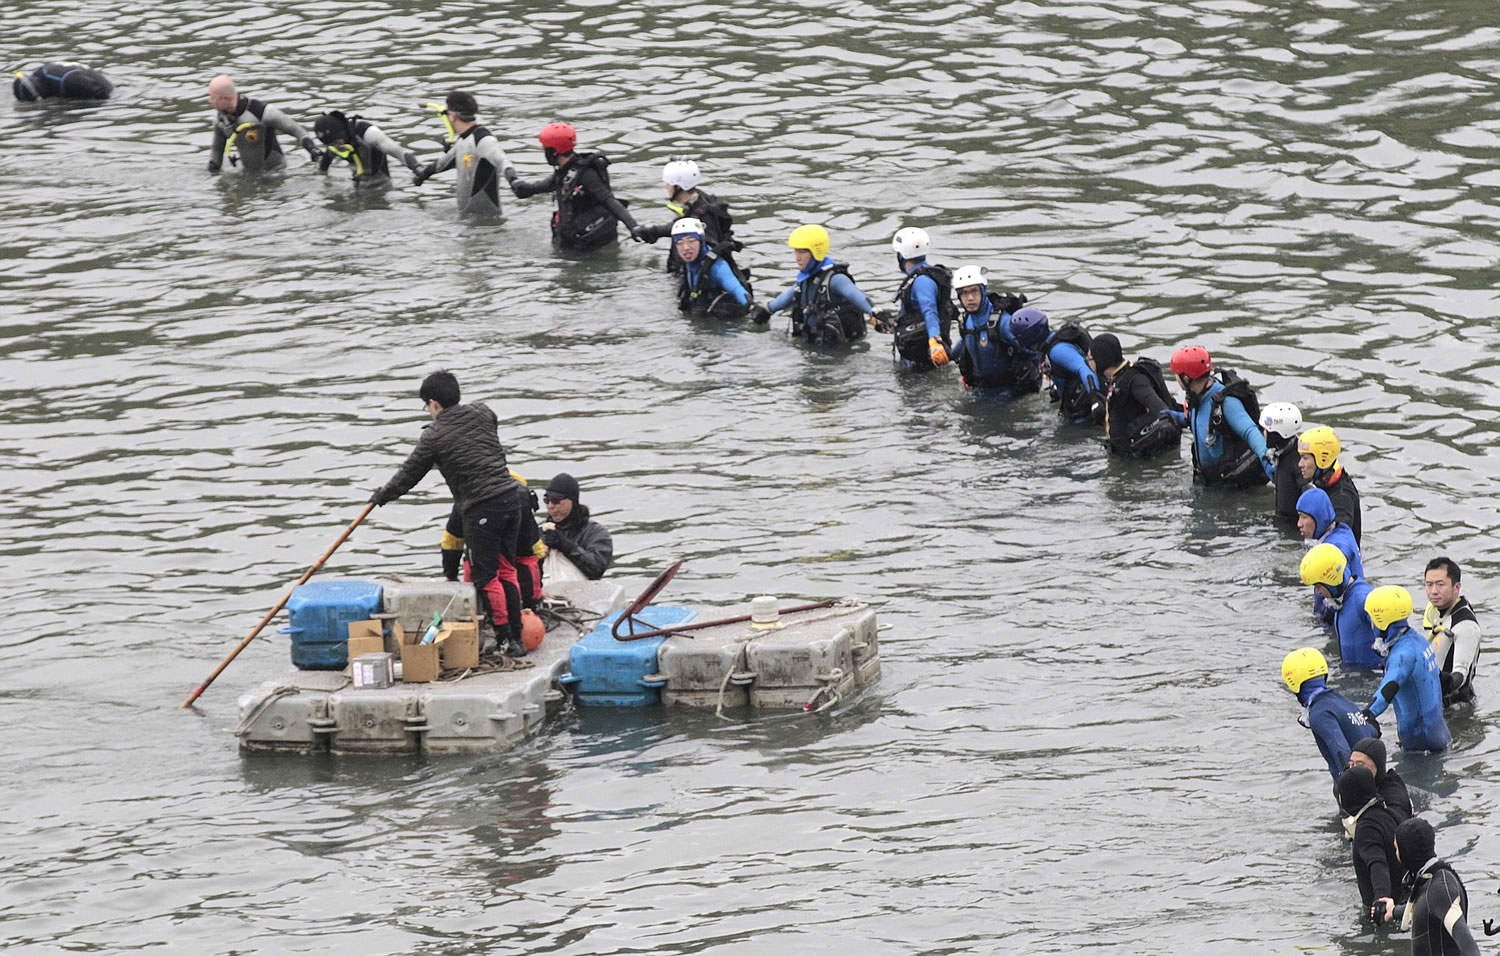 Search and rescue divers continue to search for missing persons Friday at the site of a commercial plane crash in Taipei, Taiwan. TransAsia Airways Flight 235, with 58 people aboard, clipped a bridge shortly after takeoff and crashed into a river in the island's capital of Taipei on Wednesday morning.